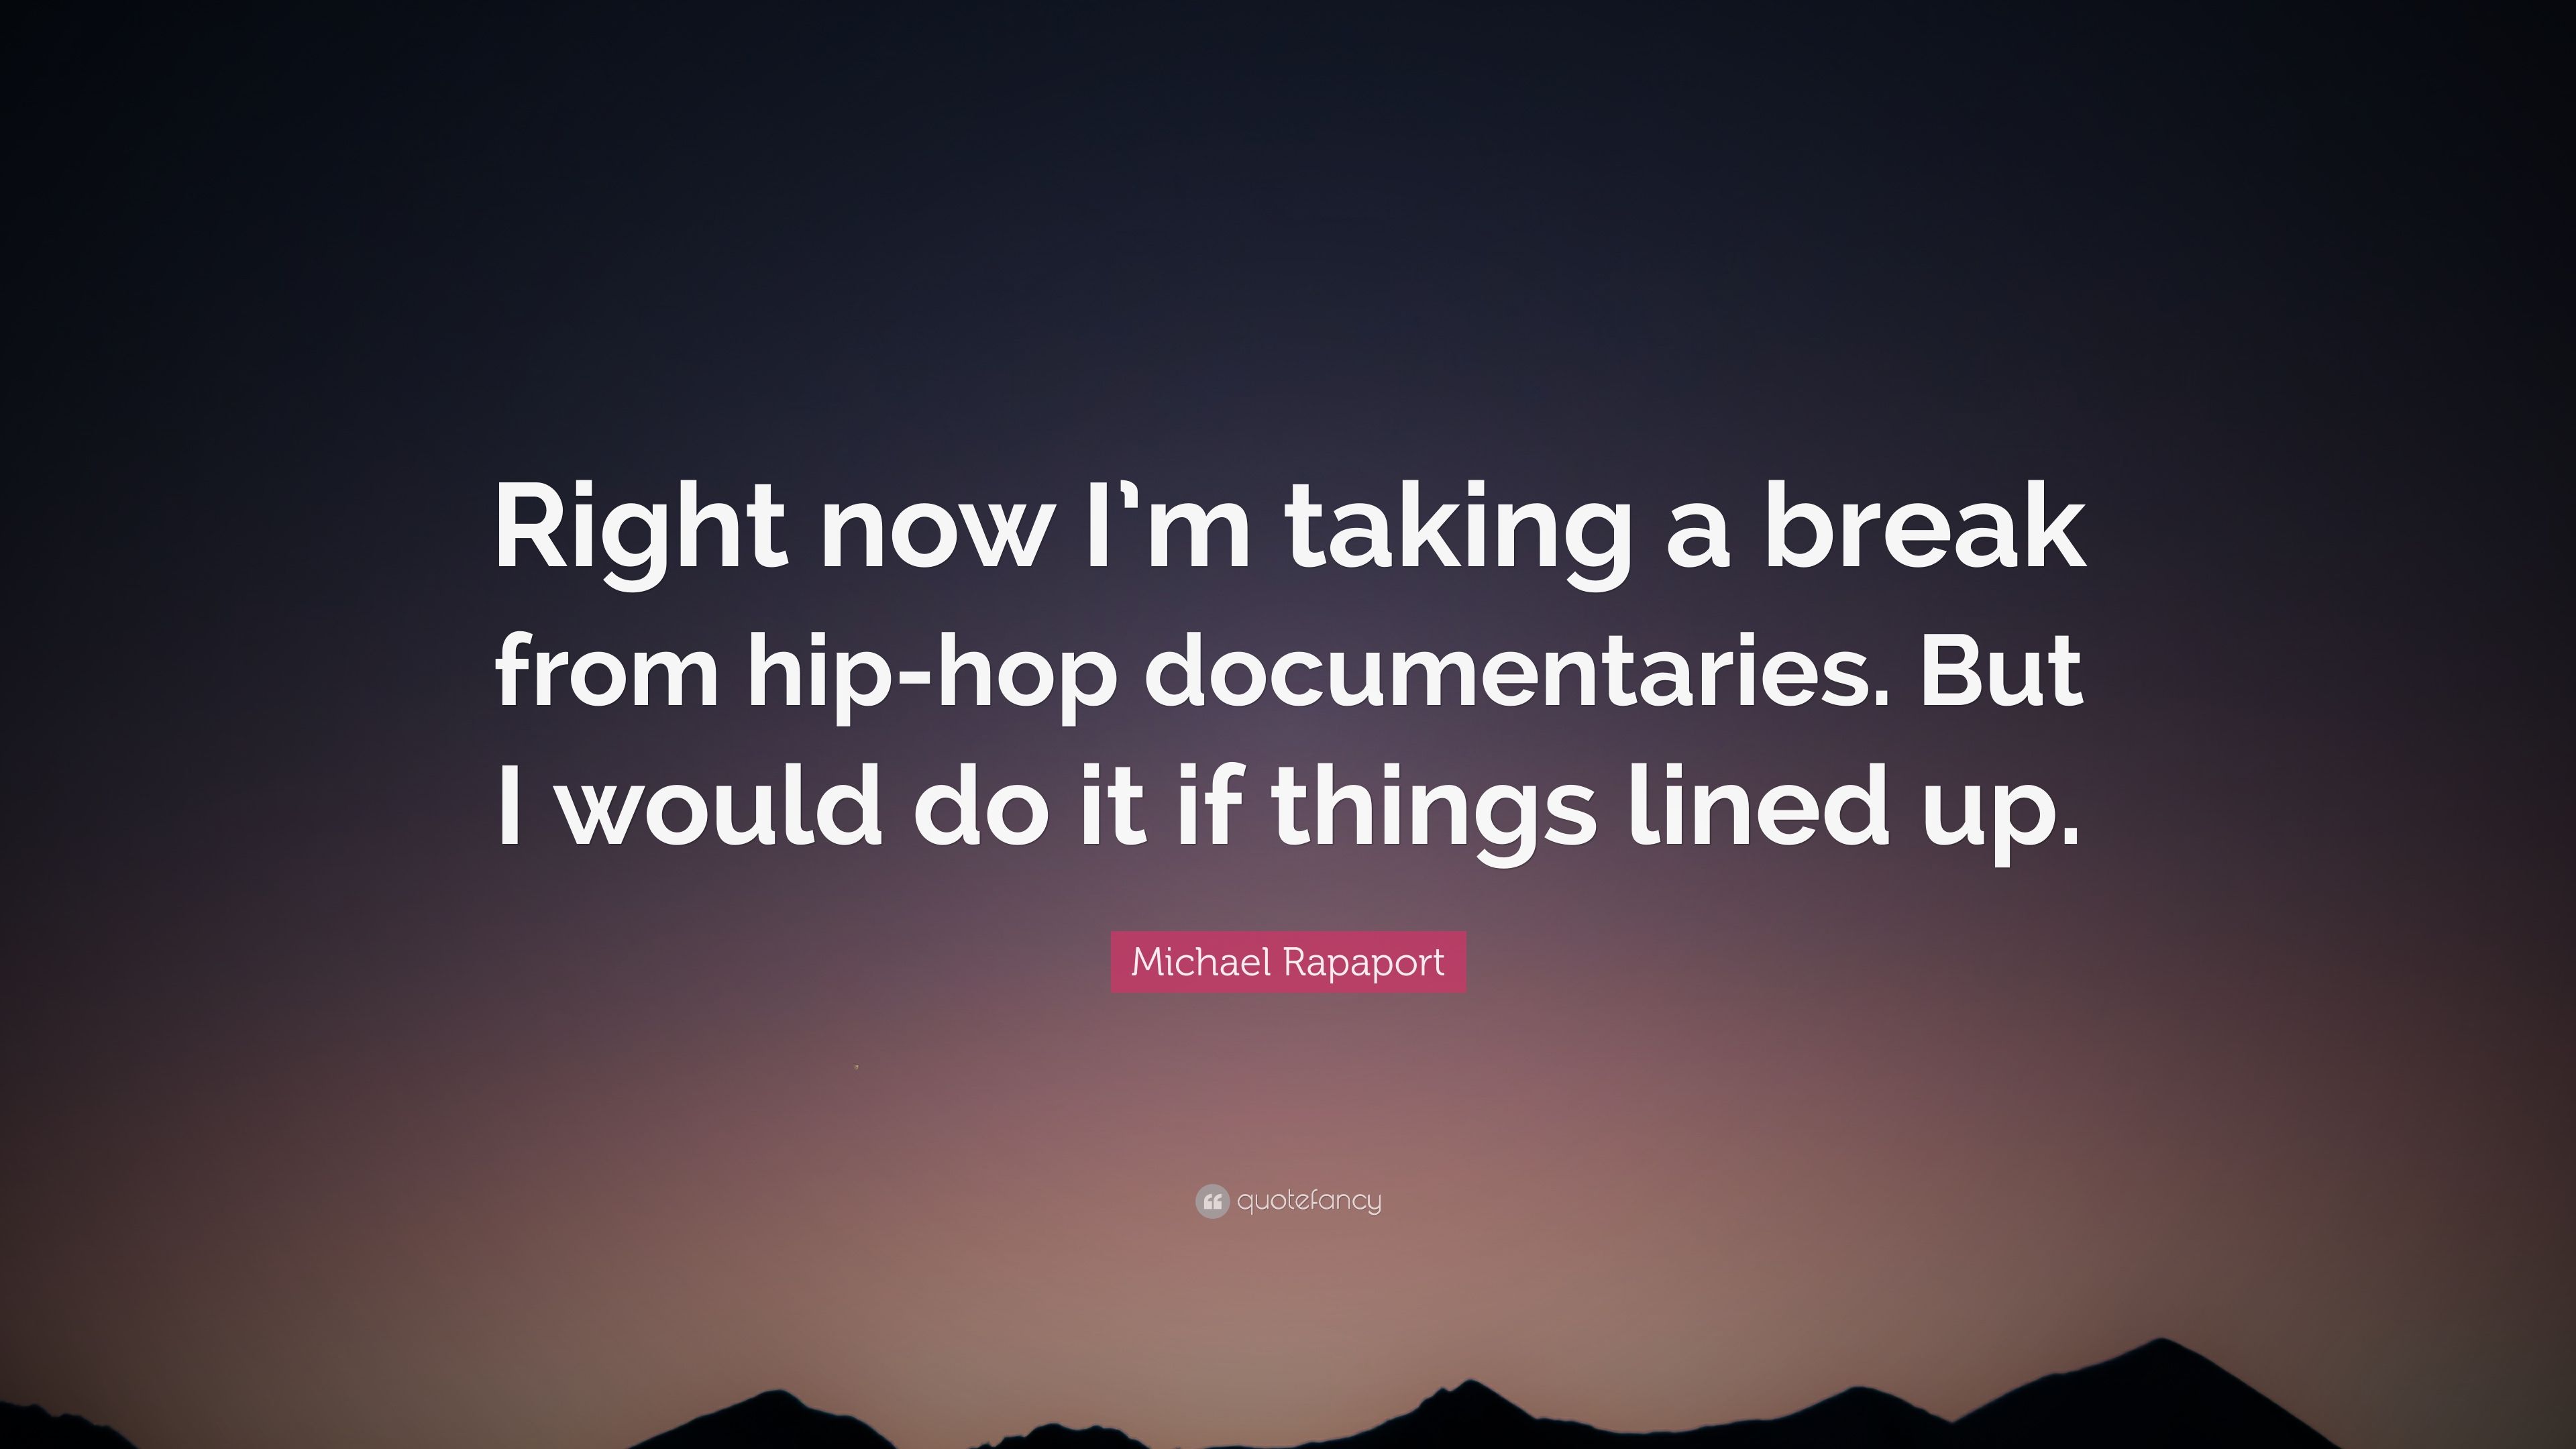 Michael Rapaport Quote: “Right Now I'm Taking A Break From Hip Hop Documentaries. But I Would Do It If Things Lined Up.” (7 Wallpaper)